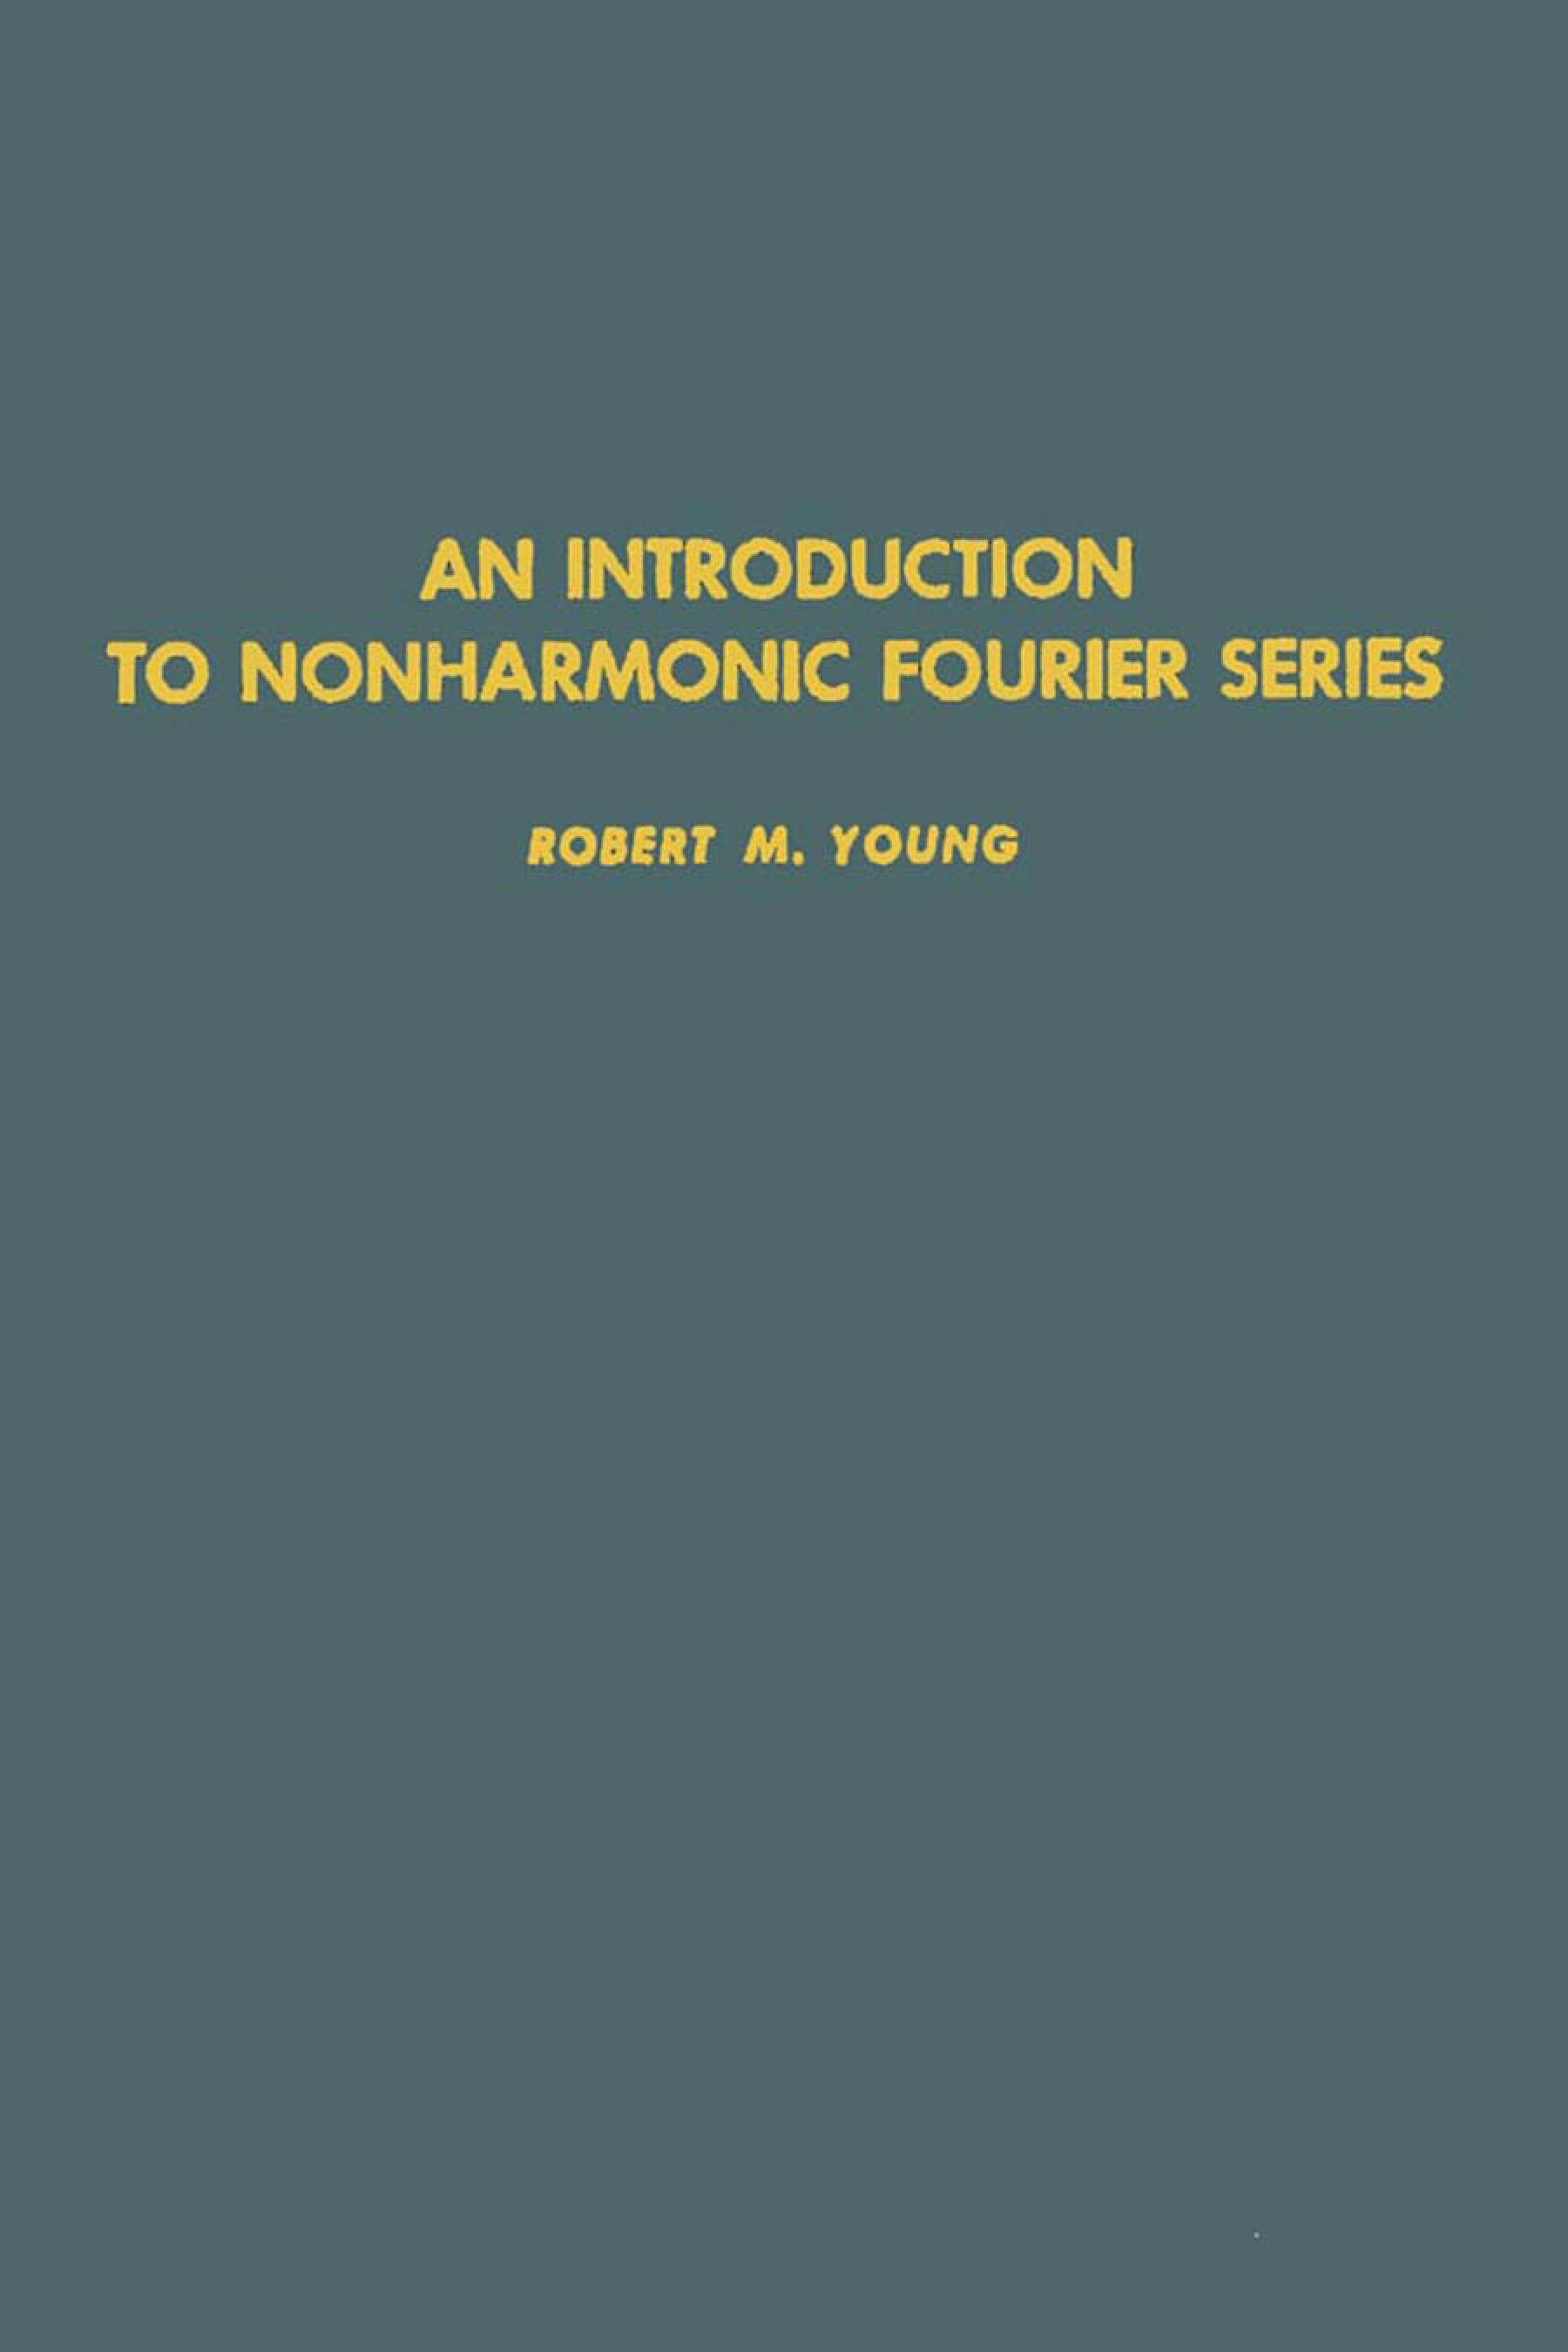 An introduction to nonharmonic Fourier series